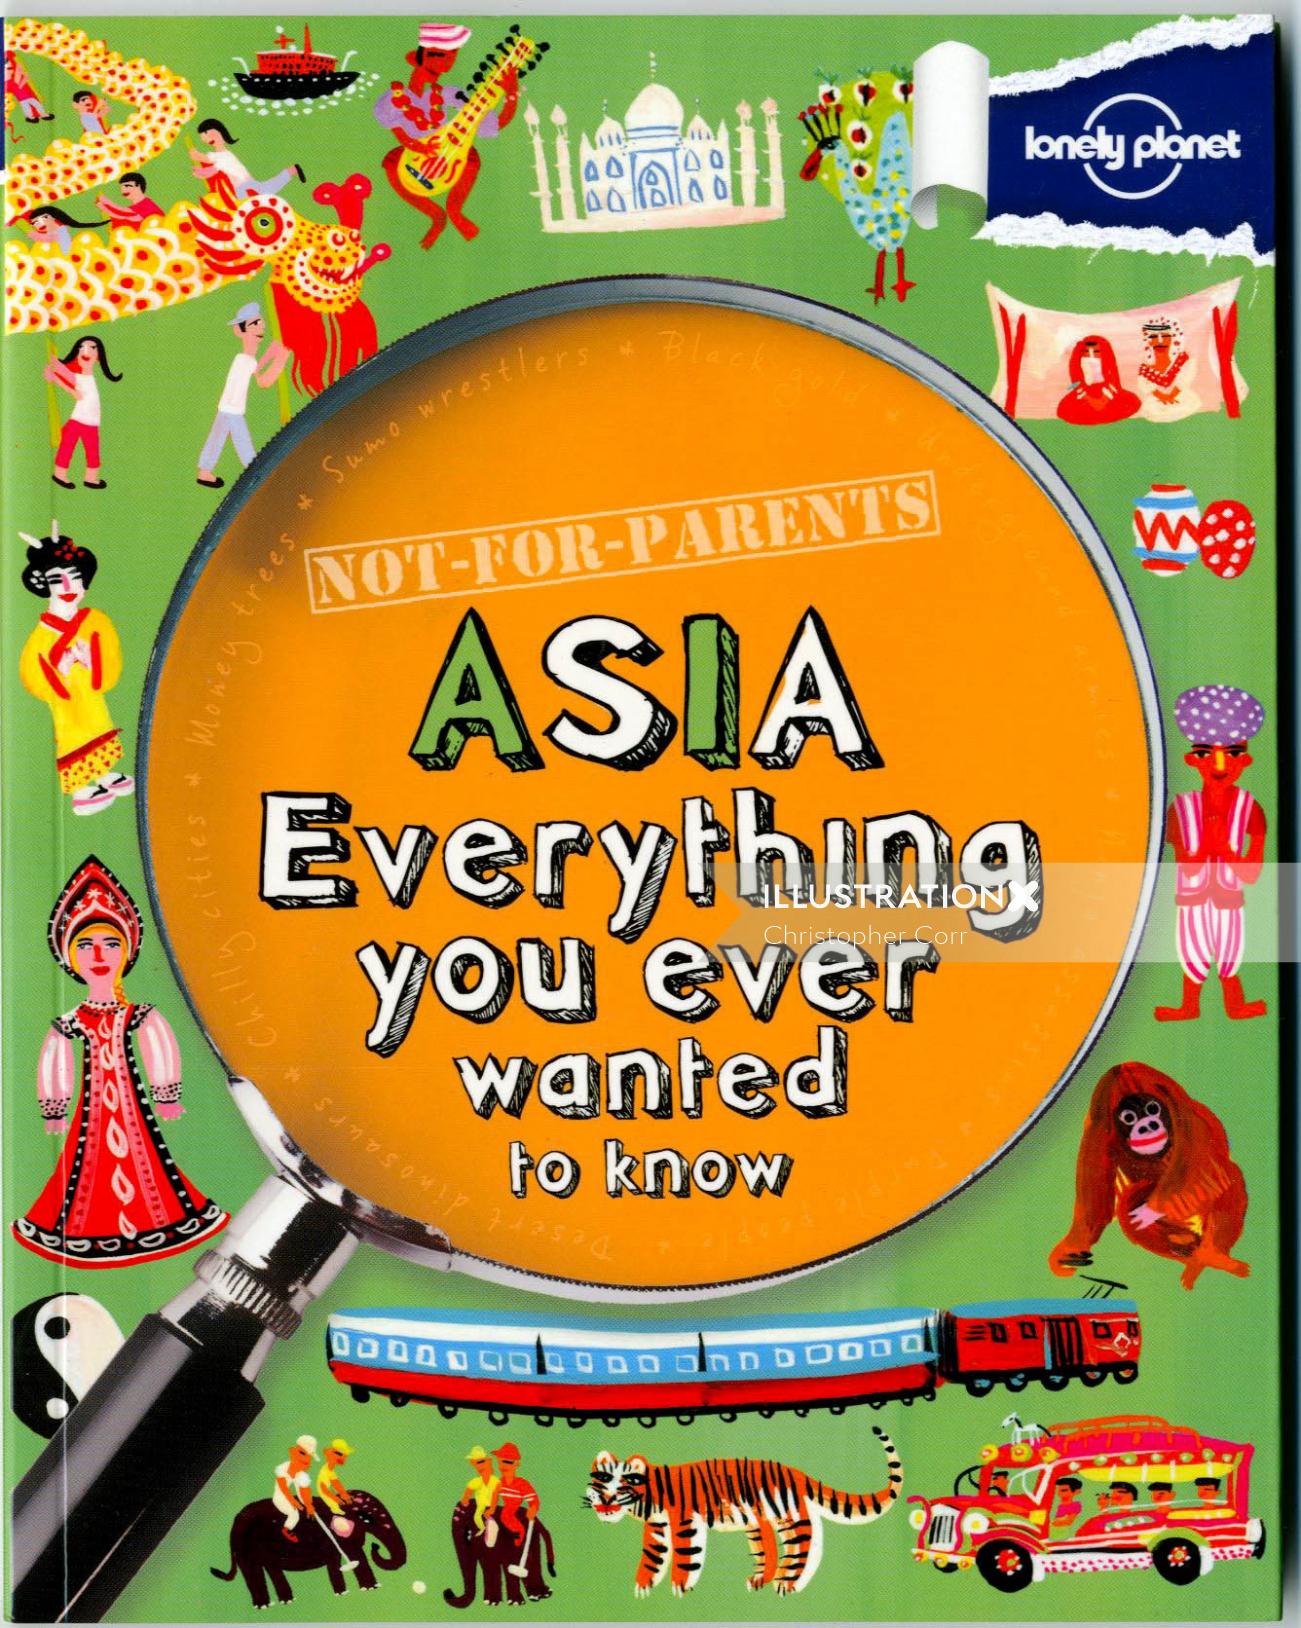 Not for Parents Asia: Everything You Ever Want to Knowブックカバーデザイン